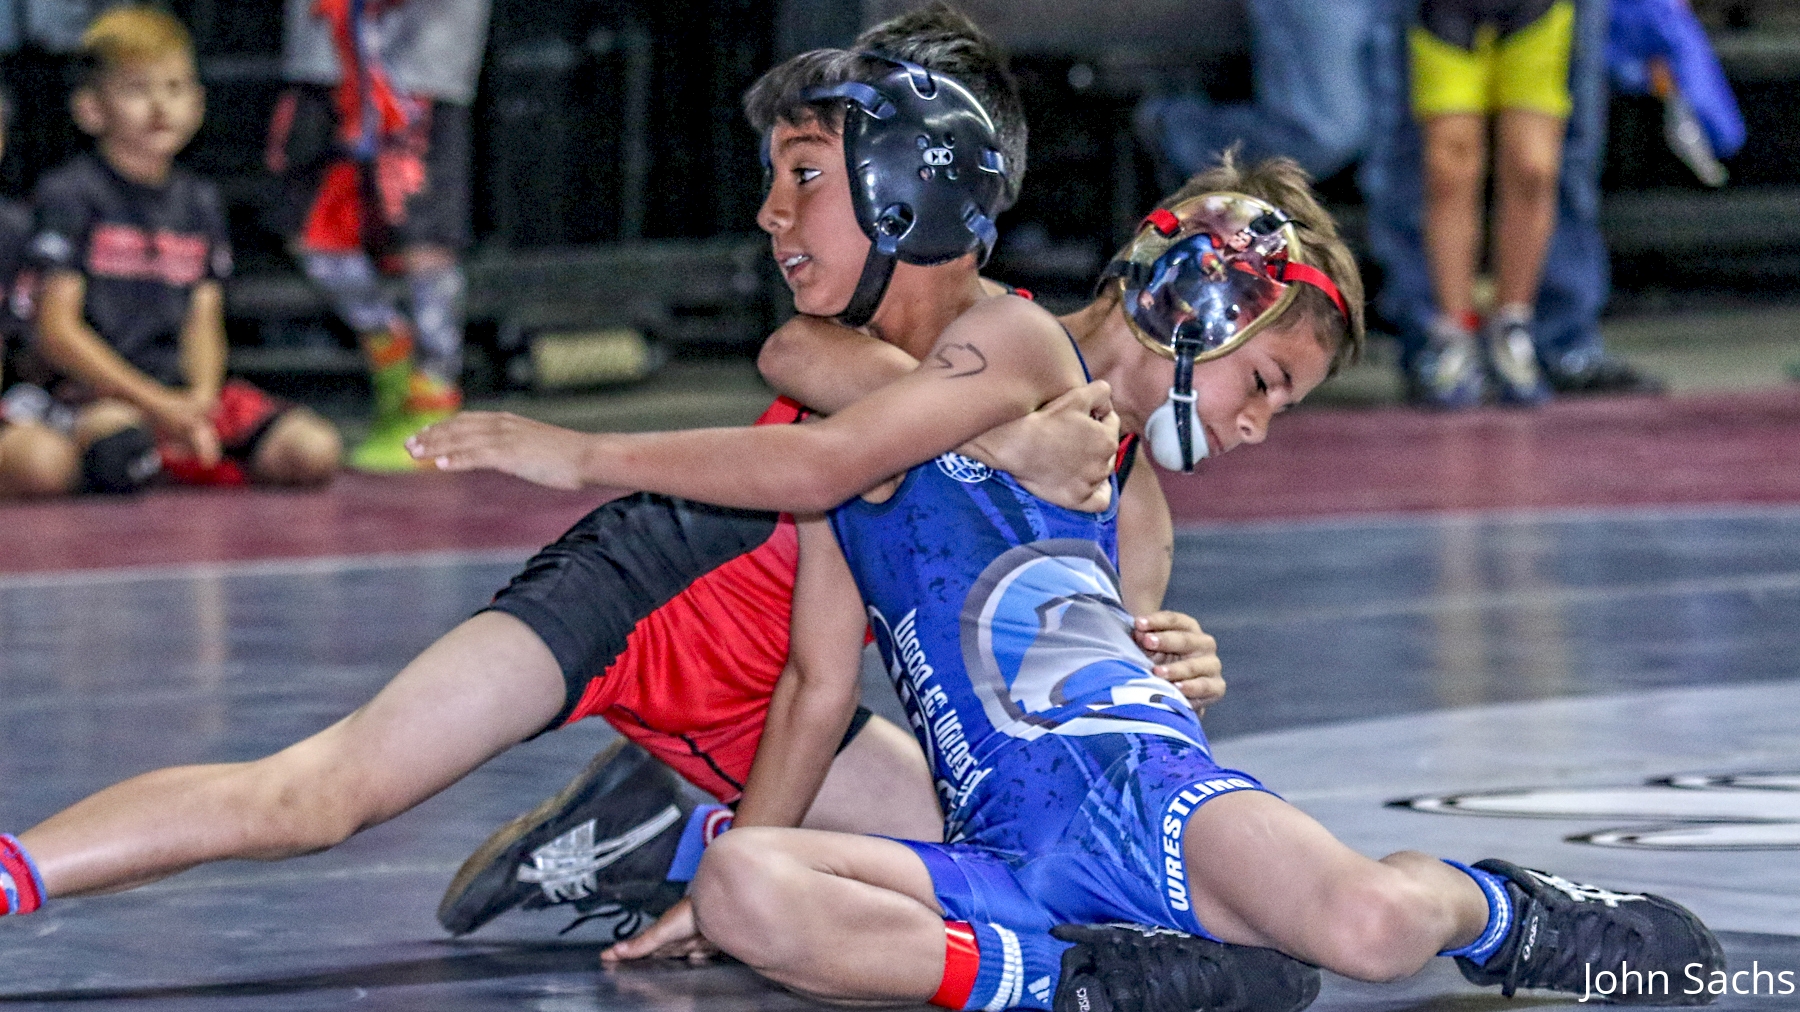 WOW Presents Flo National Youth Duals Wrestling Event FloWrestling